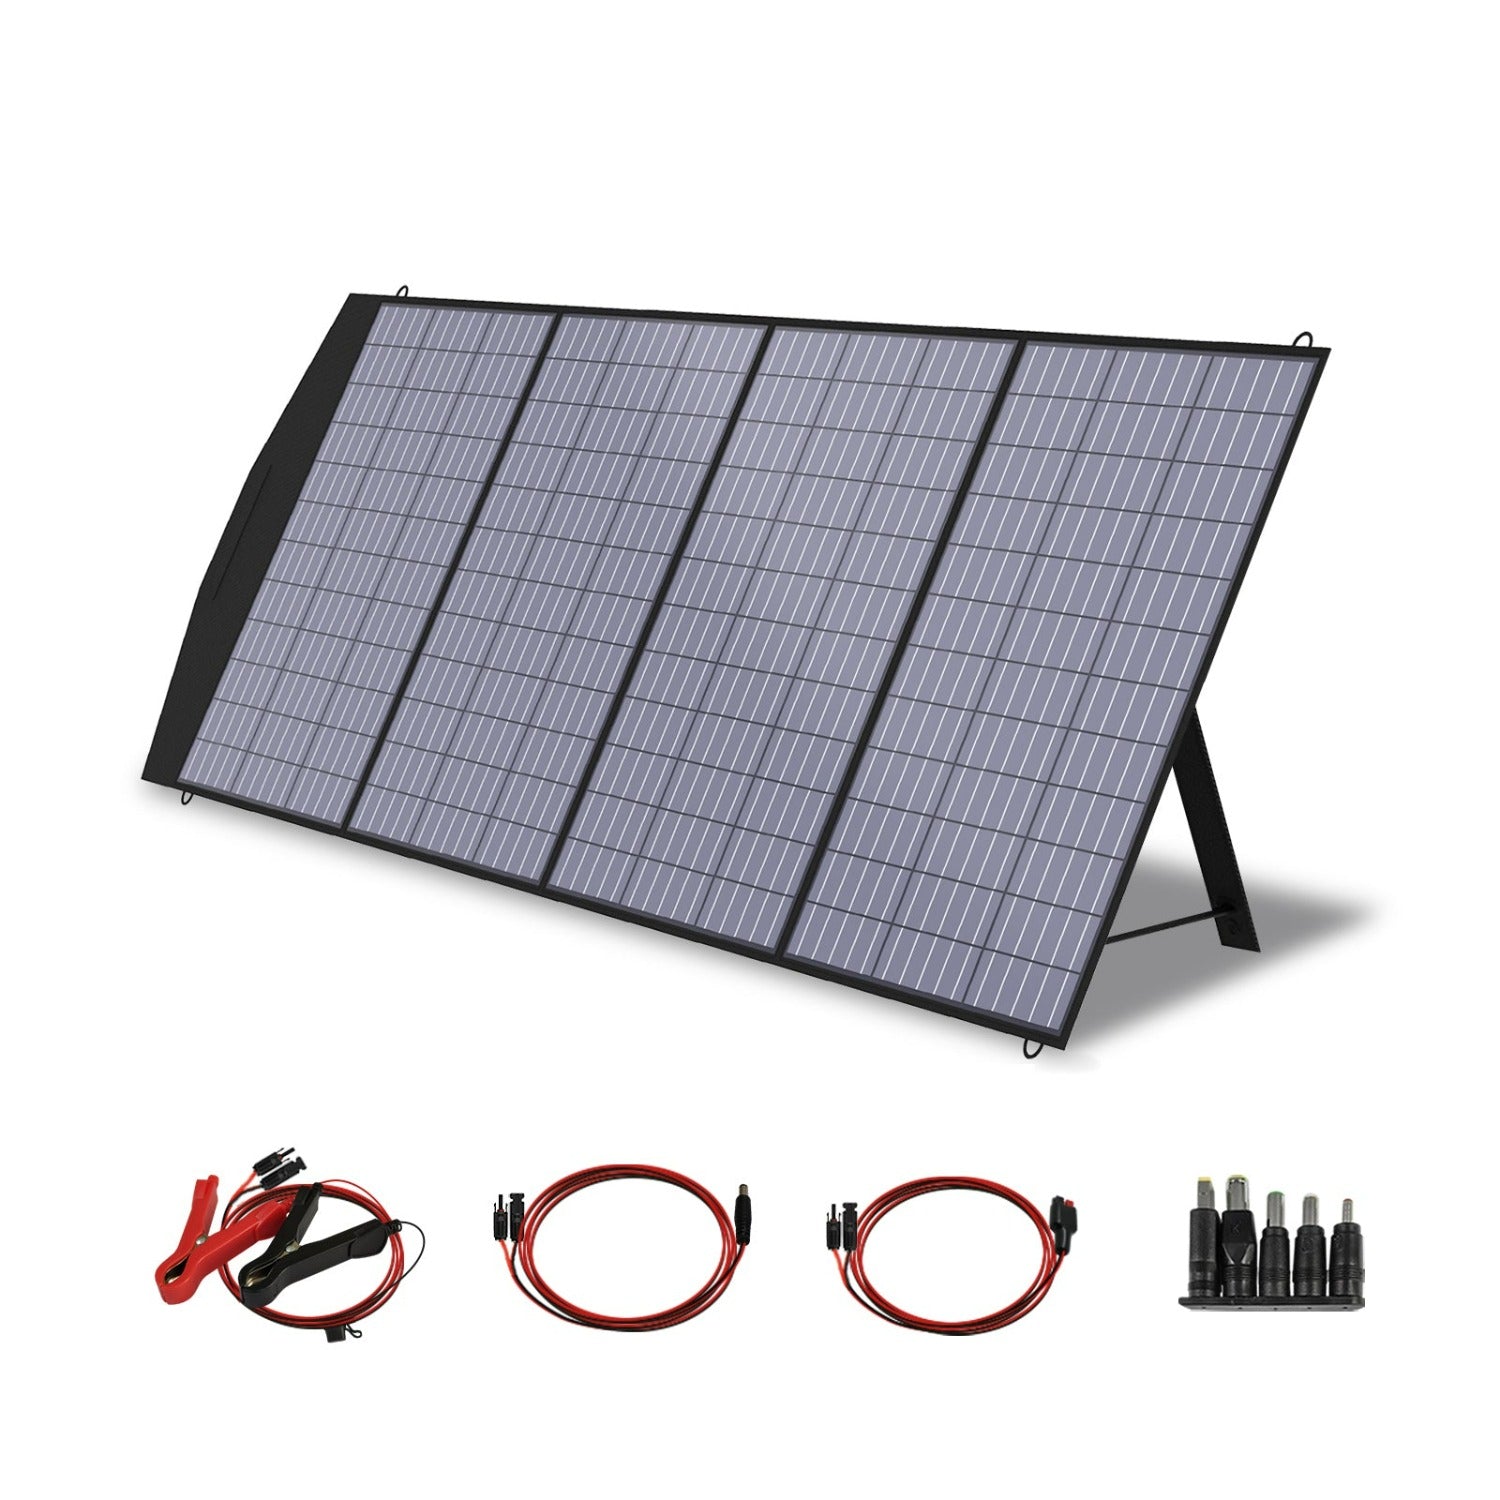 ALLPOWERS 700W Solar Generator with Solar Panel included, 606Wh